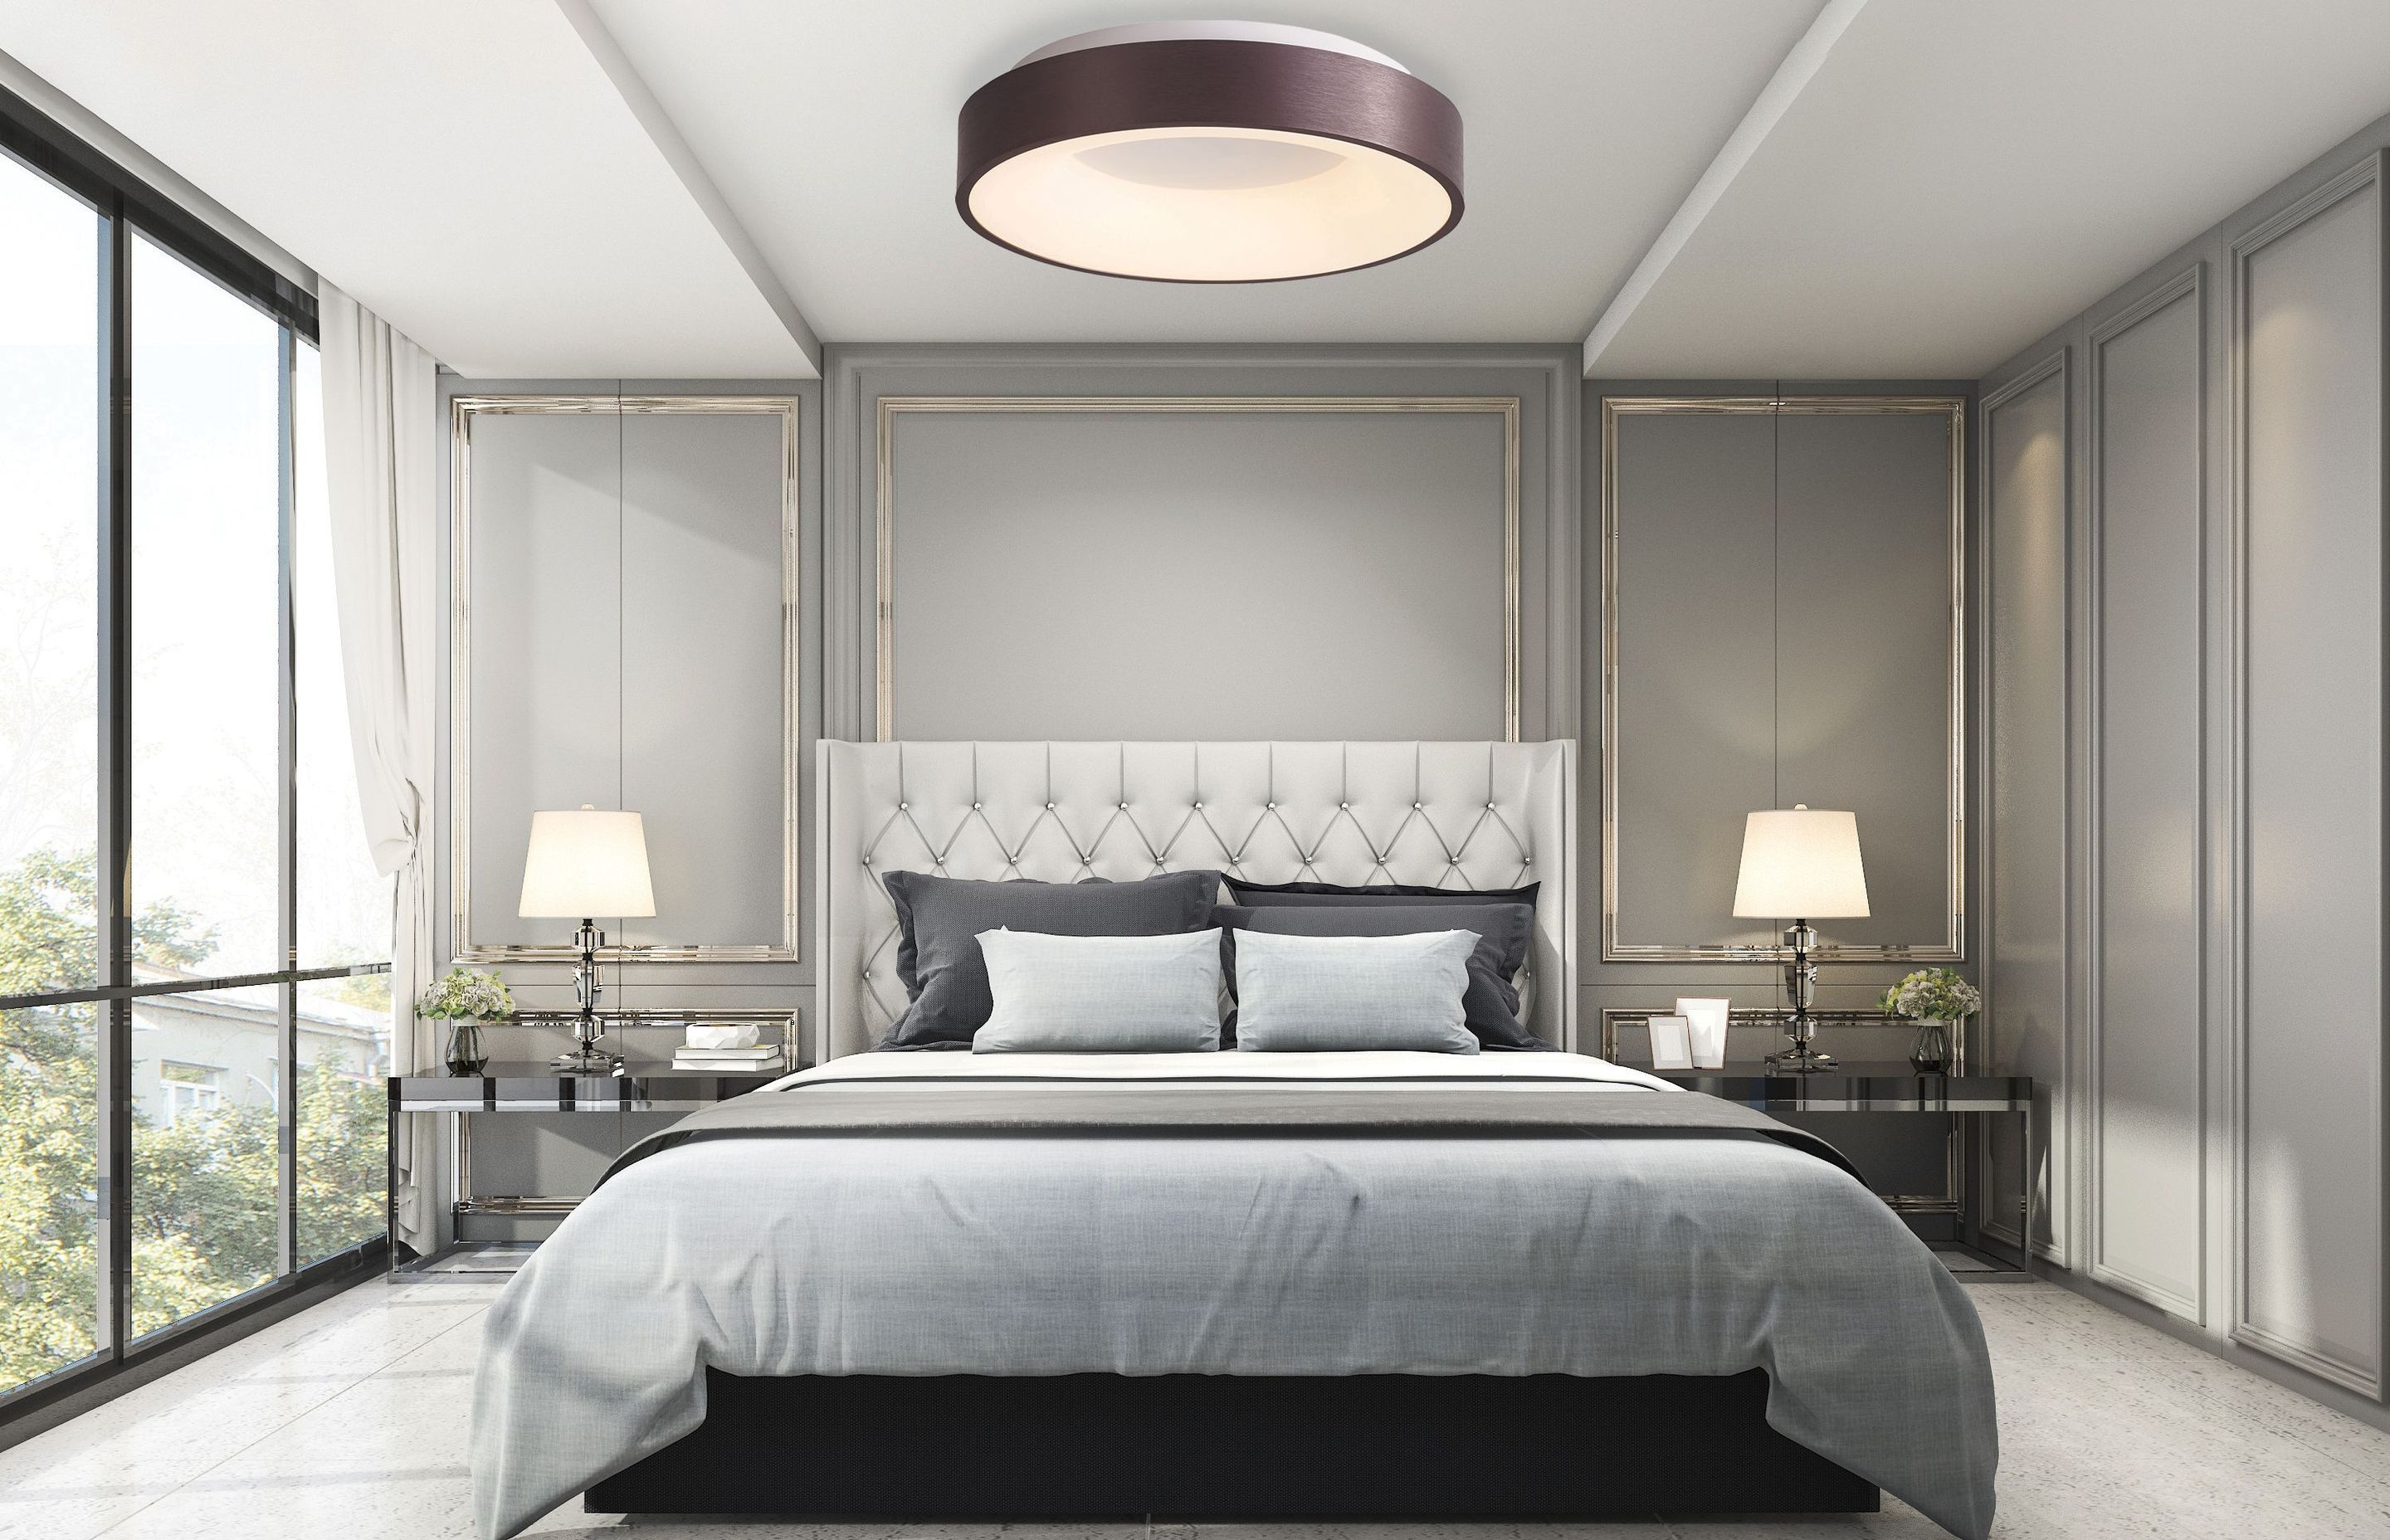 New to the Eurotech Lighting stable is Venius, an oversized decorative ceiling ‘button’, which has been designed to replace a single, pendant-style fixture.